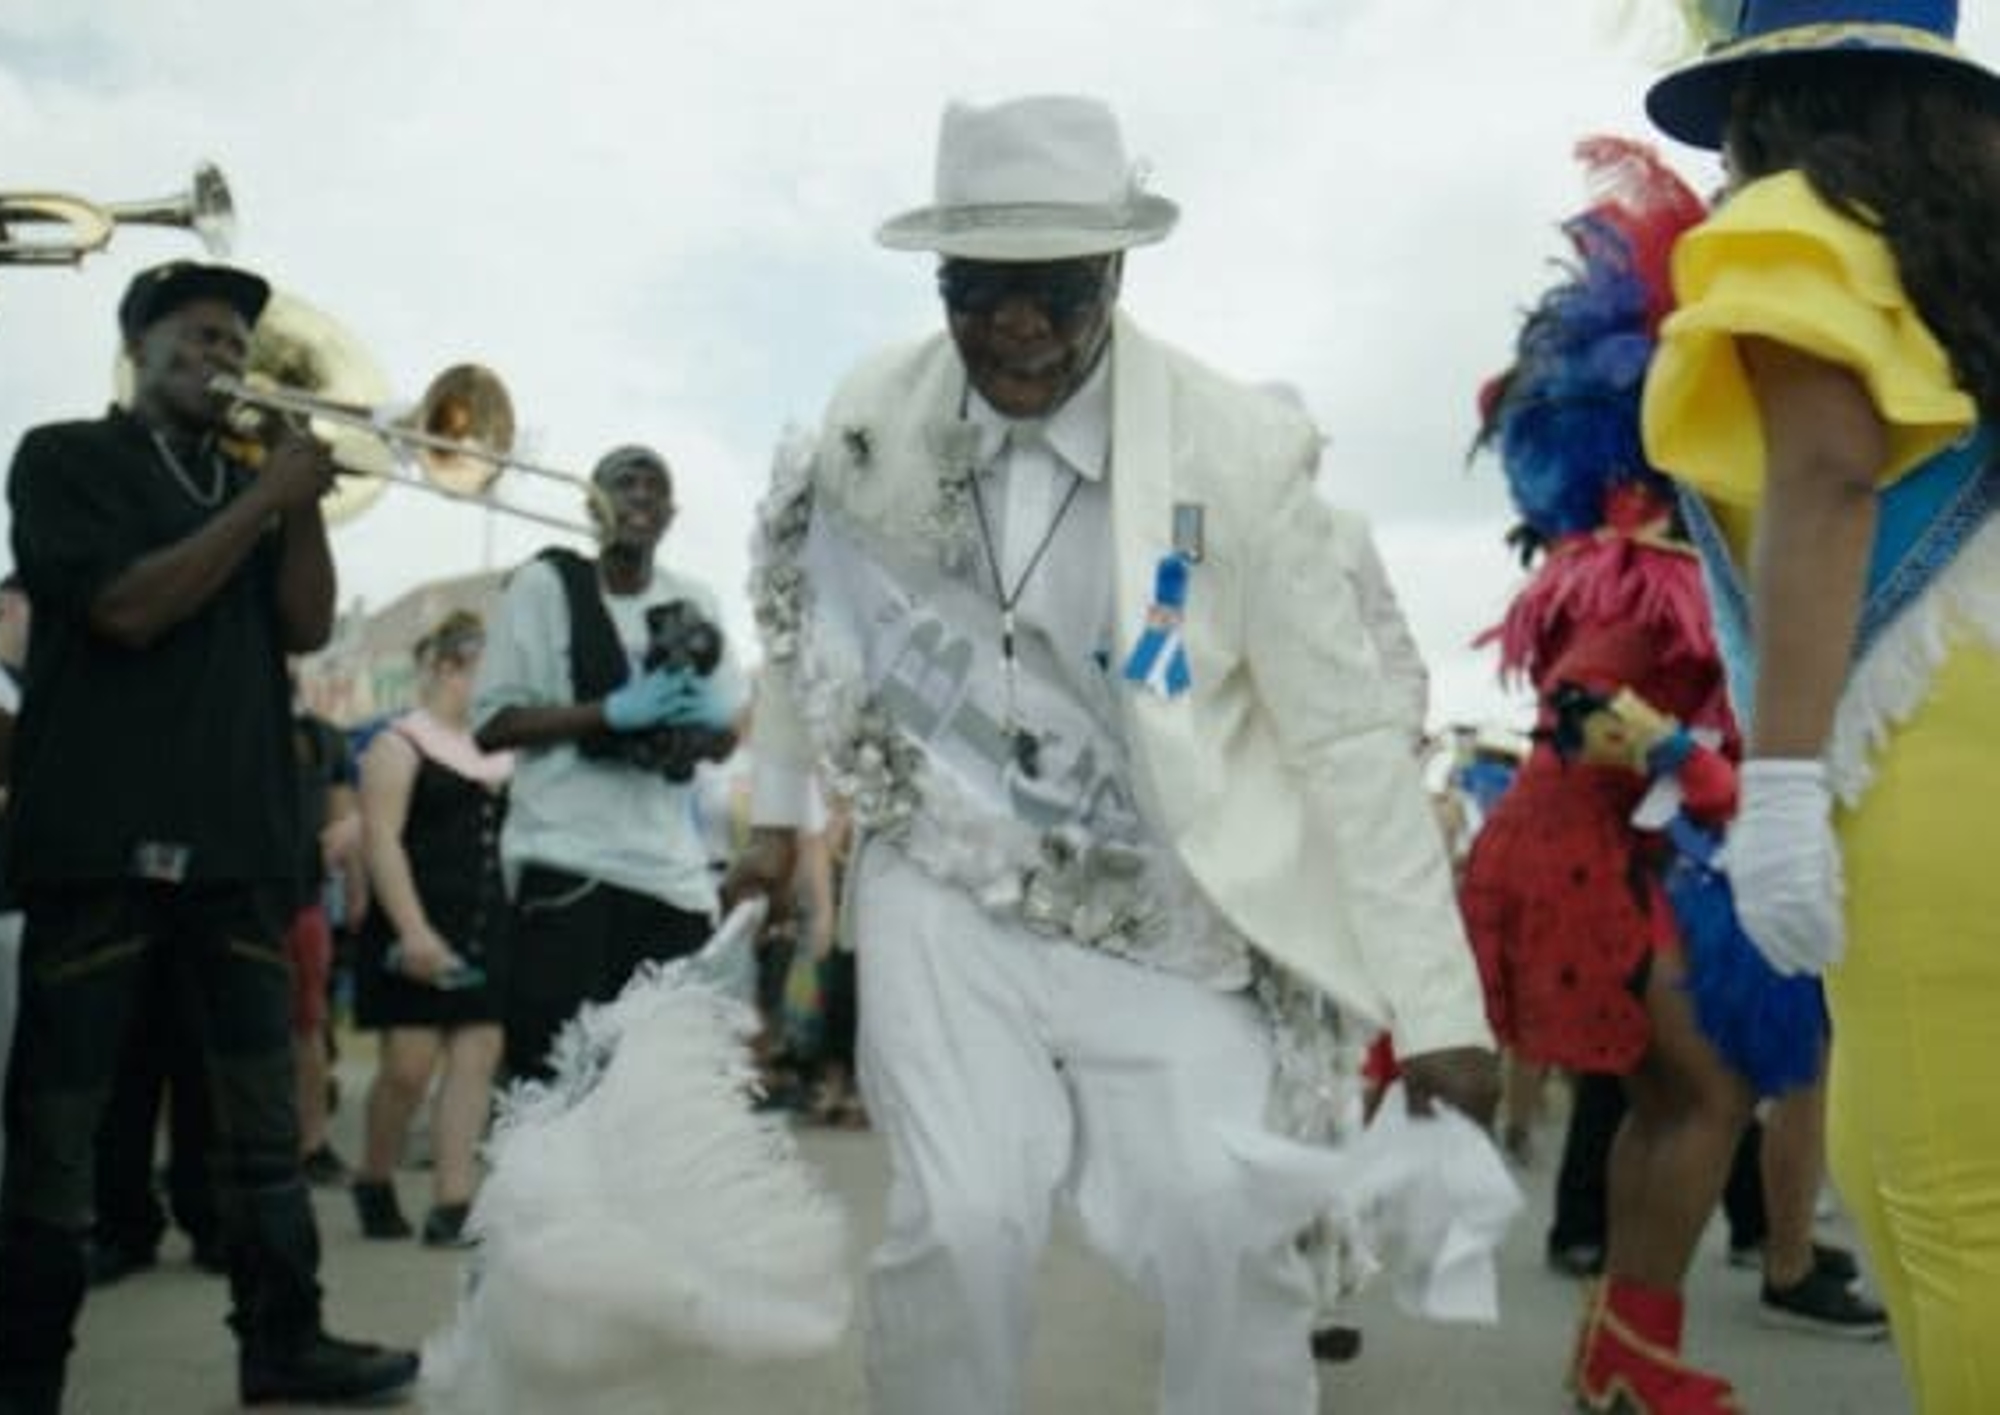 A scene from the documentary film JAZZ FEST: A New Orleans Story